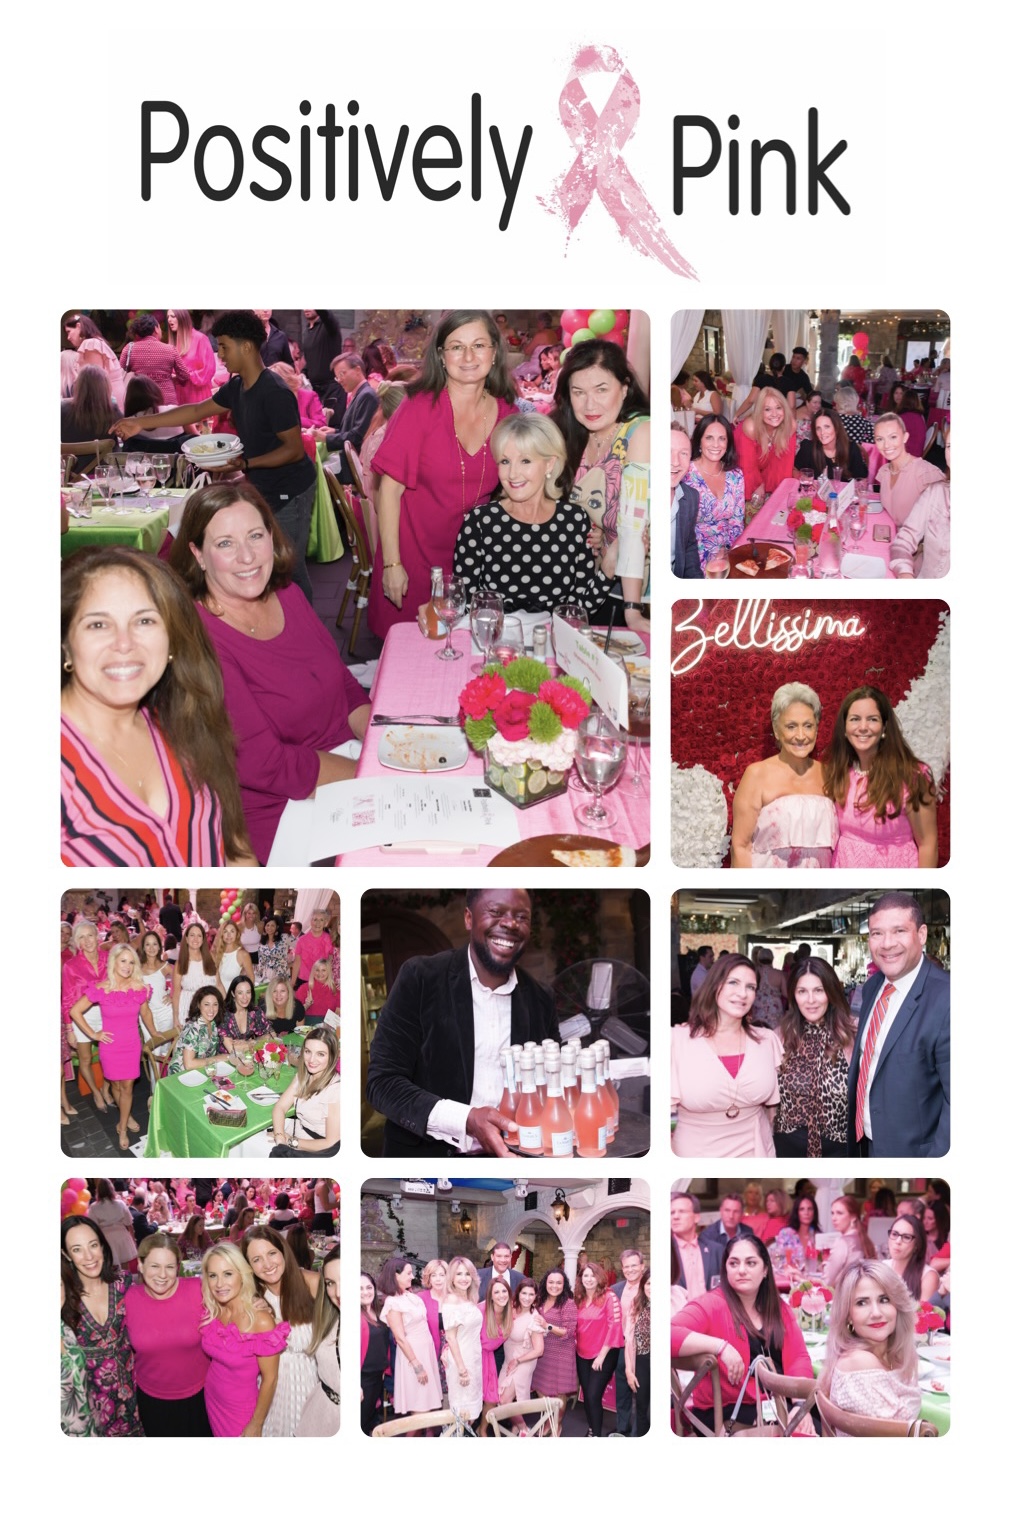 A collage of pictures of Positively Pink attendees